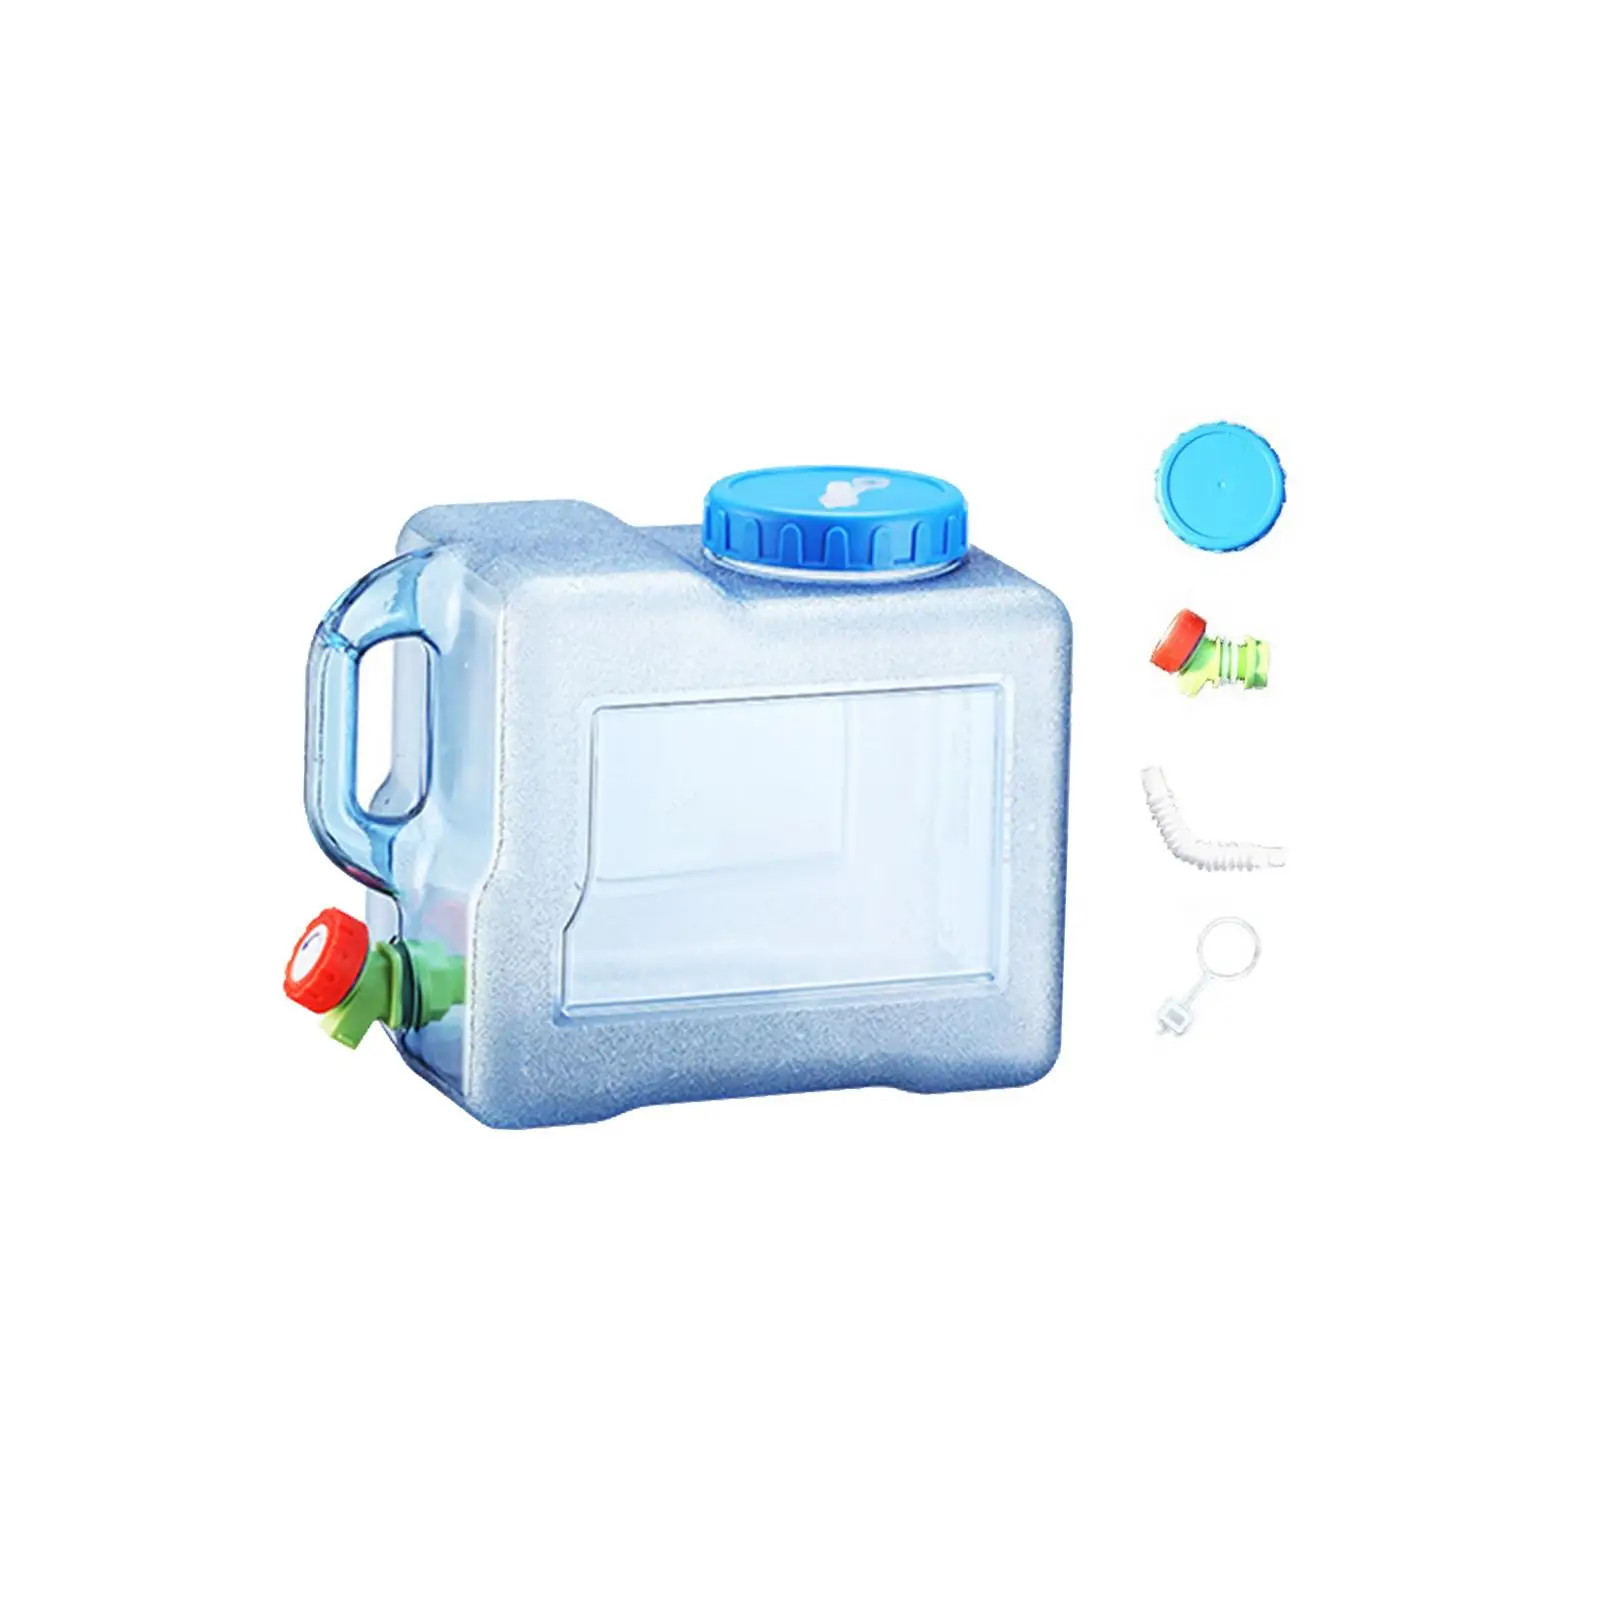 Camping Water Tank Water Storage Container Multipurpose Food Grade PC Material Water Jug Transparent Blue for Washing Hands